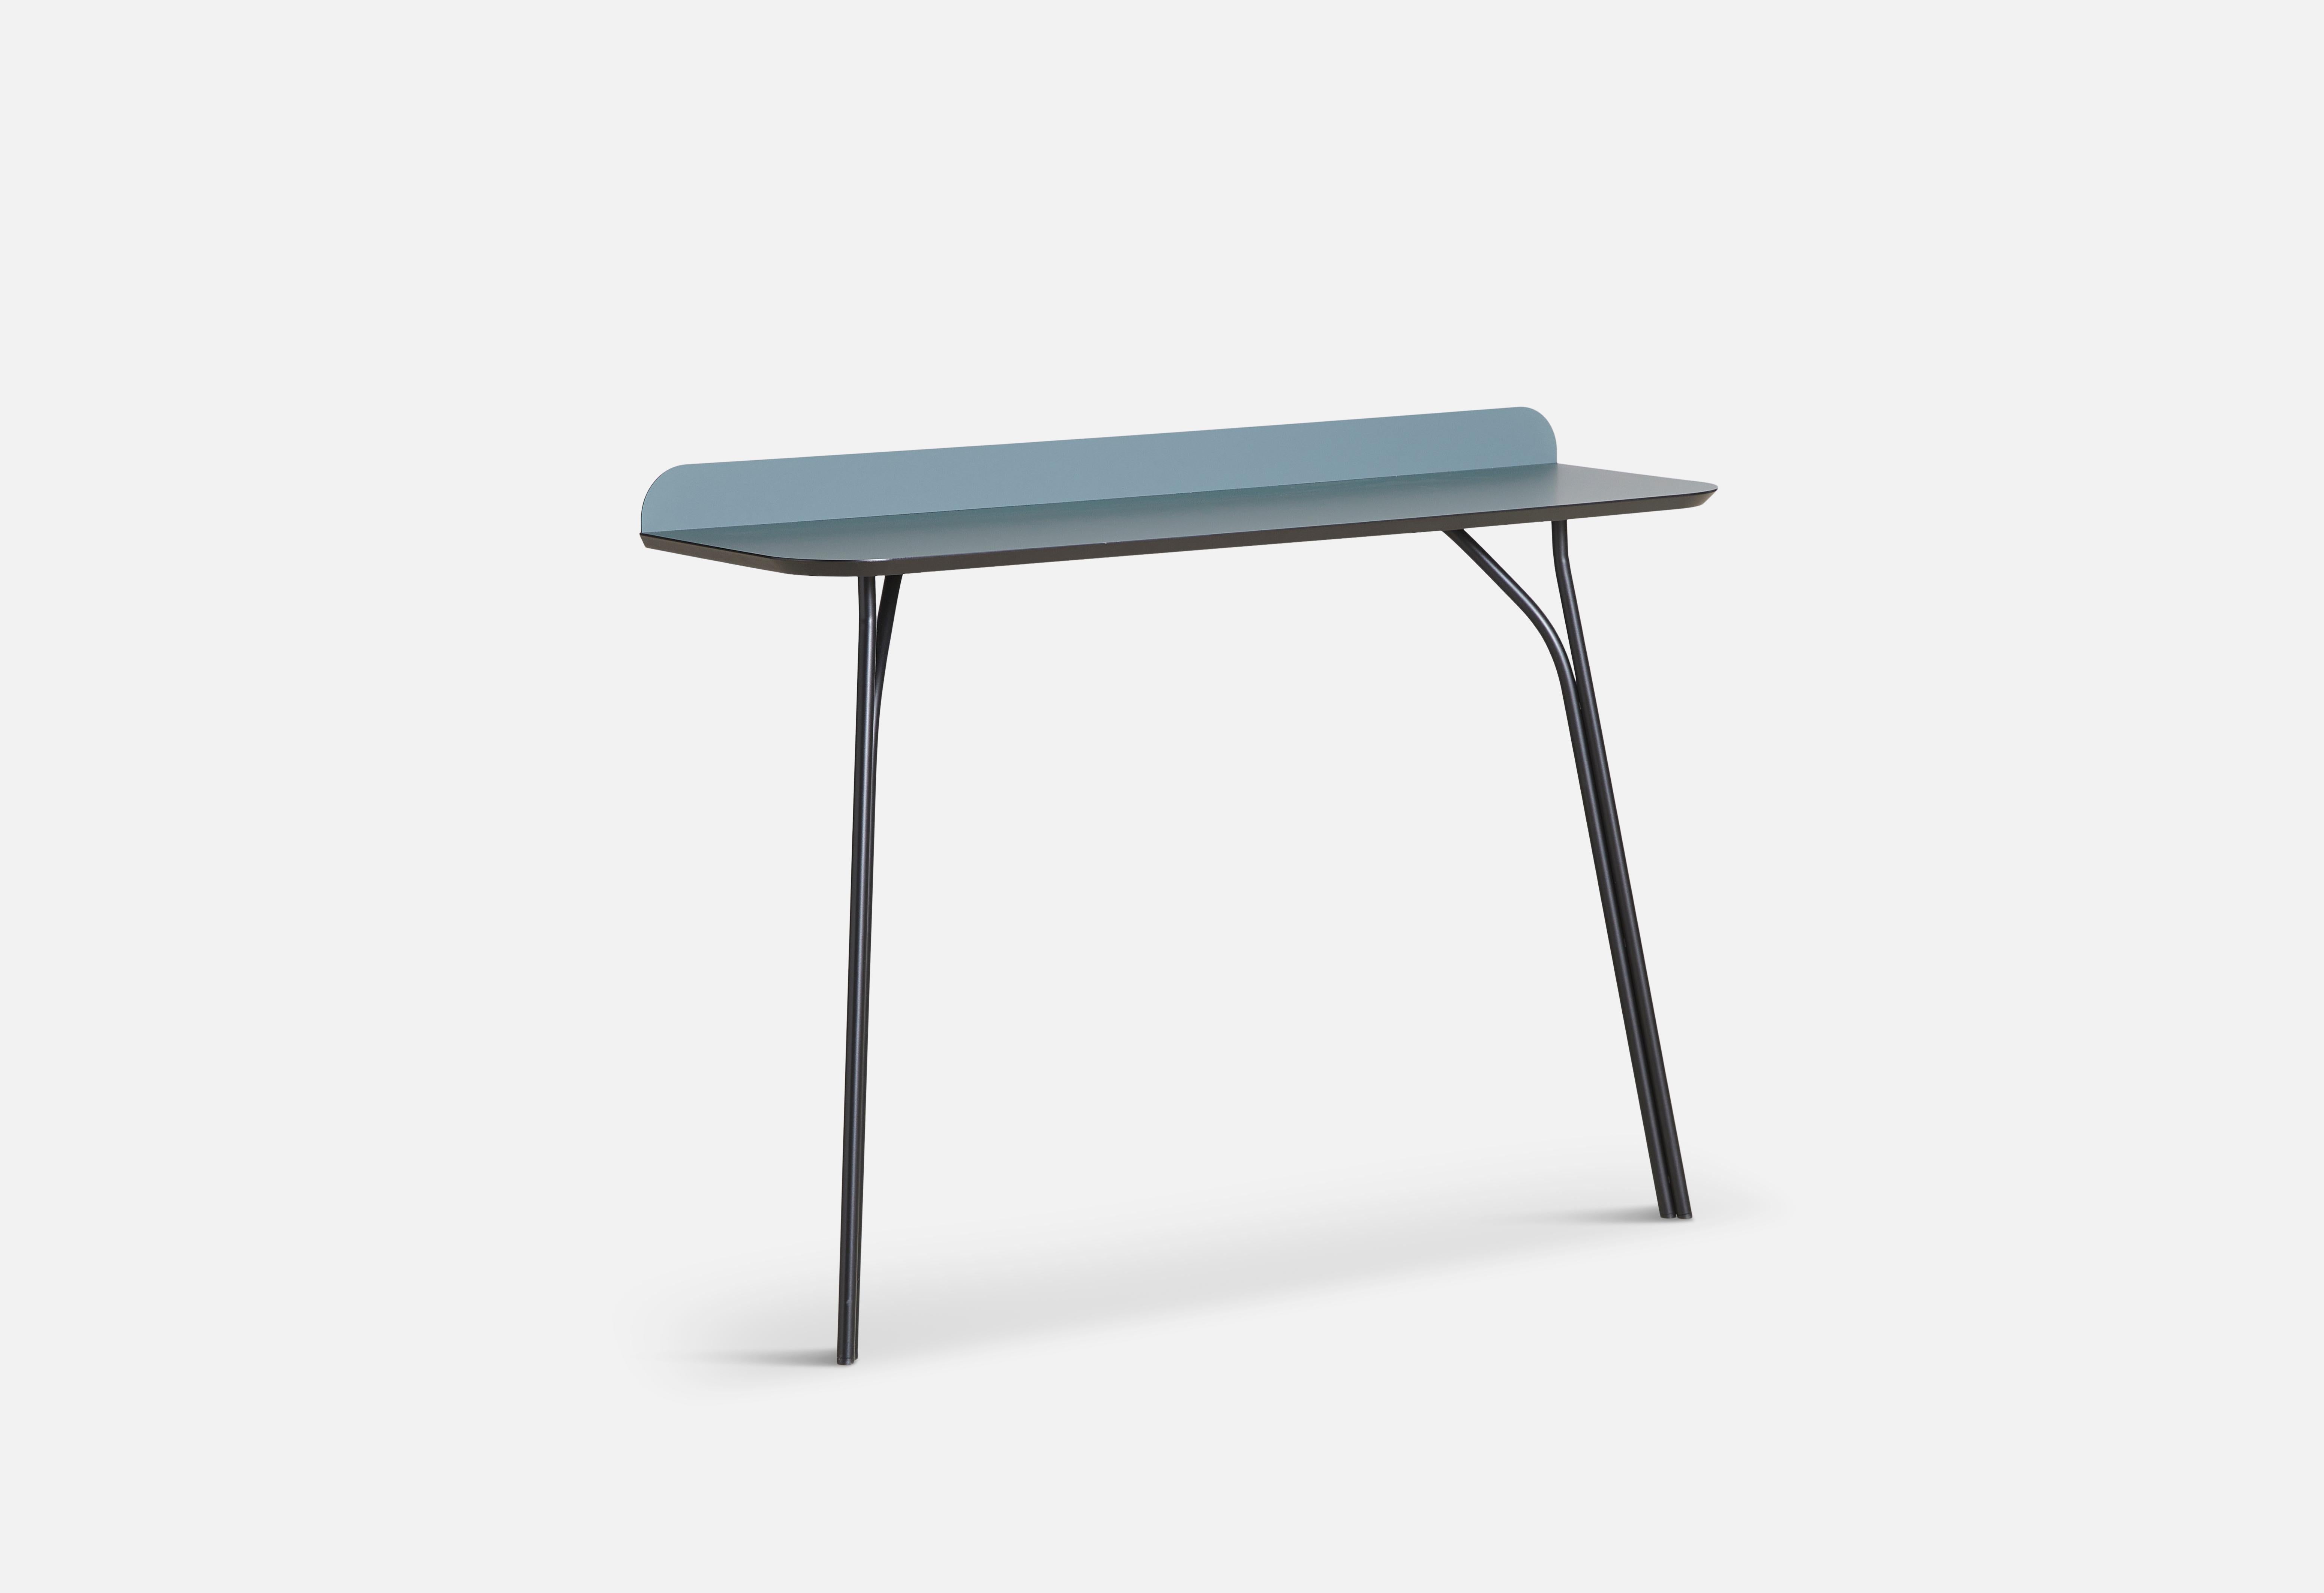 Verde Comodoro Tree Console Table by Elisabeth Hertzfeld 
Materials: Fenix Laminate, Metal 
Dimensions: D 40 x W 130 x H 96 cm
Also available in different sizes. Please contact us.

The founders, Mia and Torben Koed, decided to put their 30